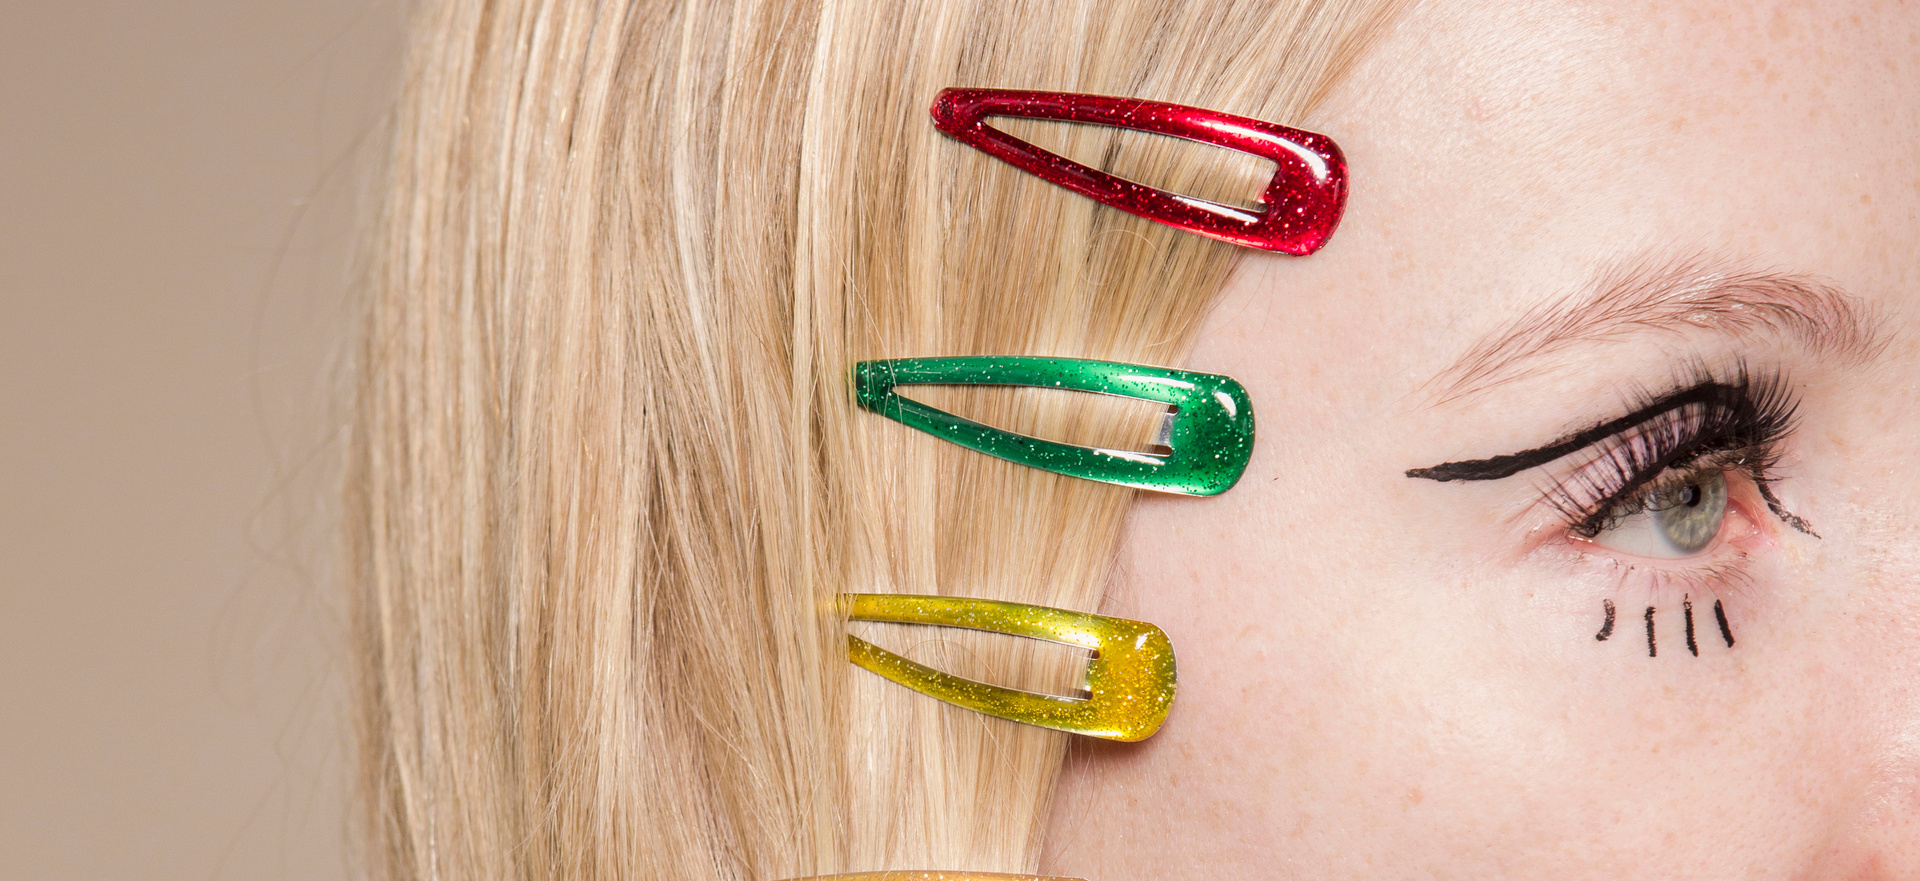 Woman with black eyeliner and multicolored bright hair clips